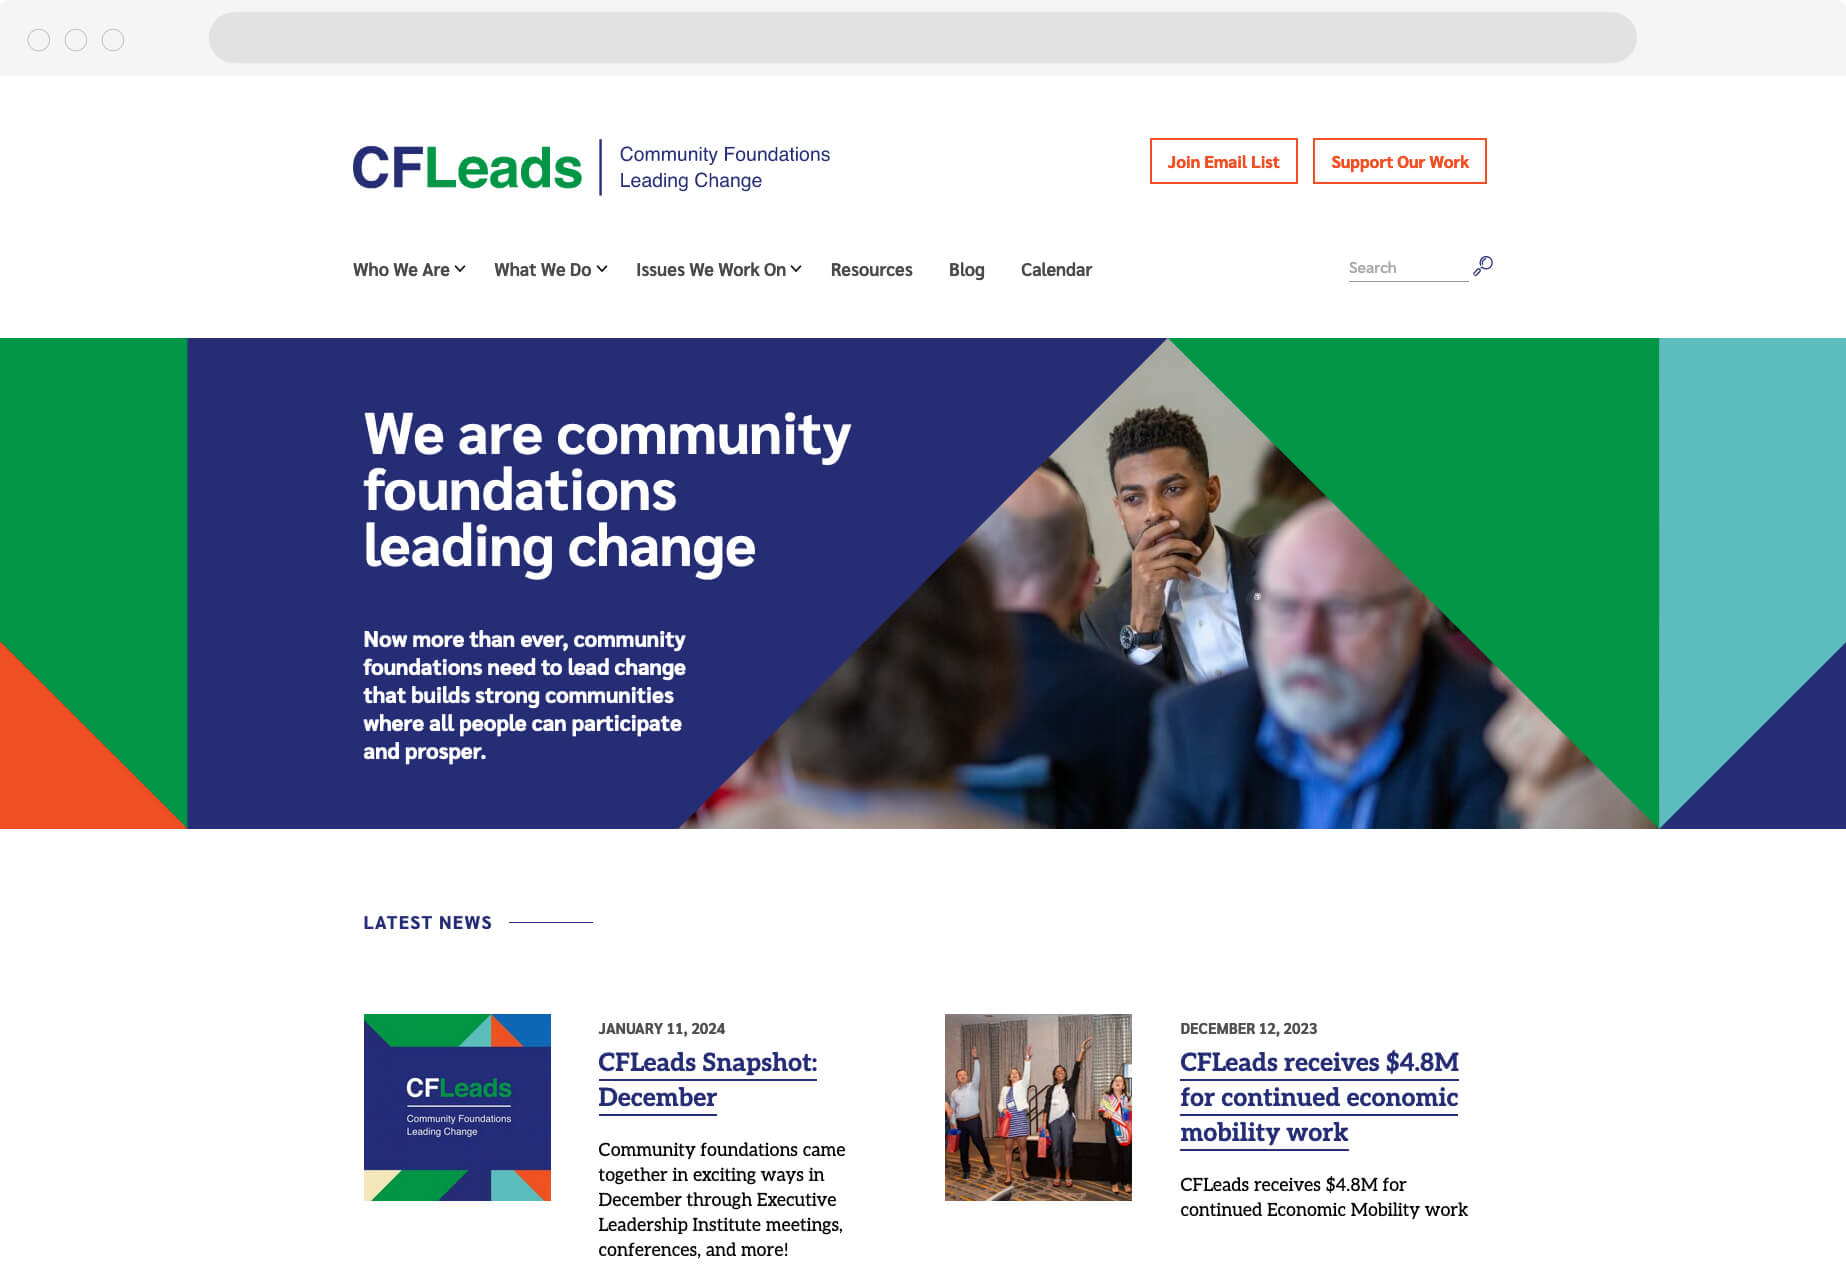 A homepage with hero area "We are community foundations leading change" with an image of a group of people listening and sitting in a room together.